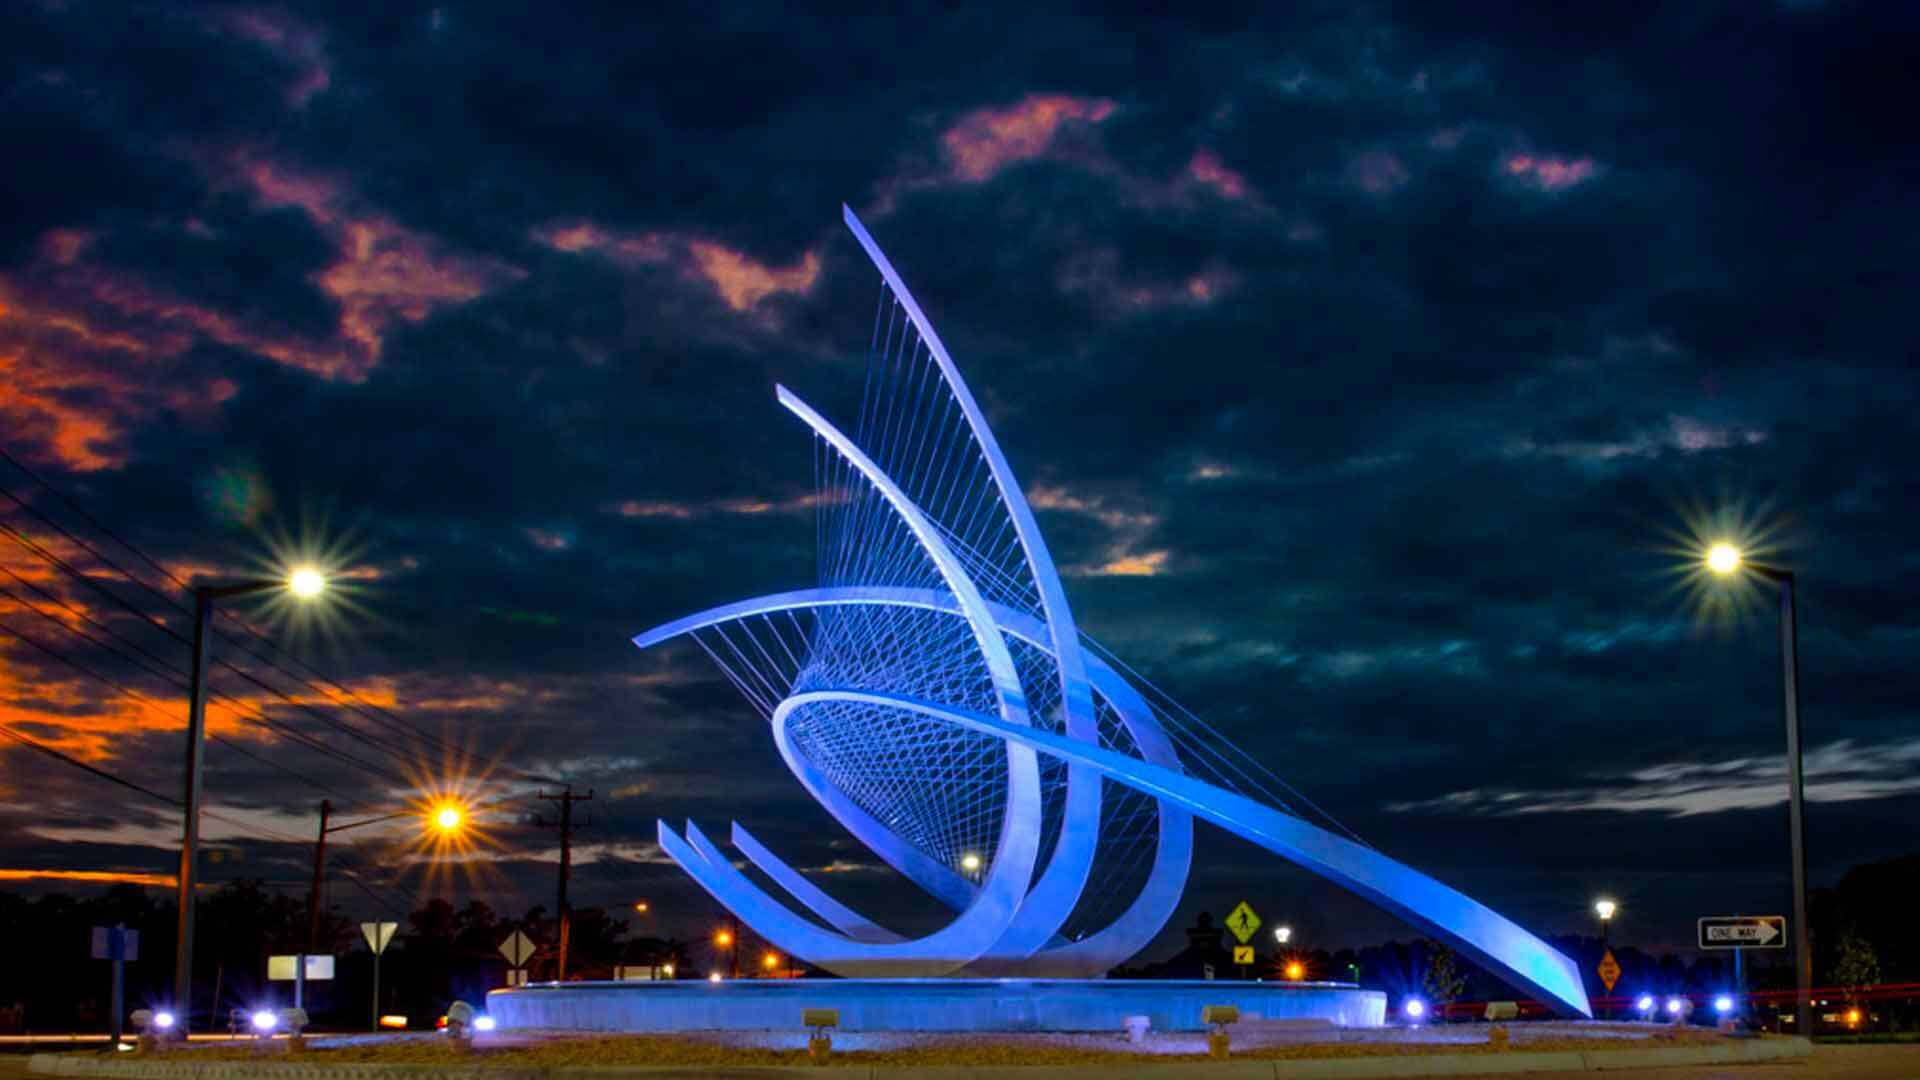 The Wave Sculpture at Night